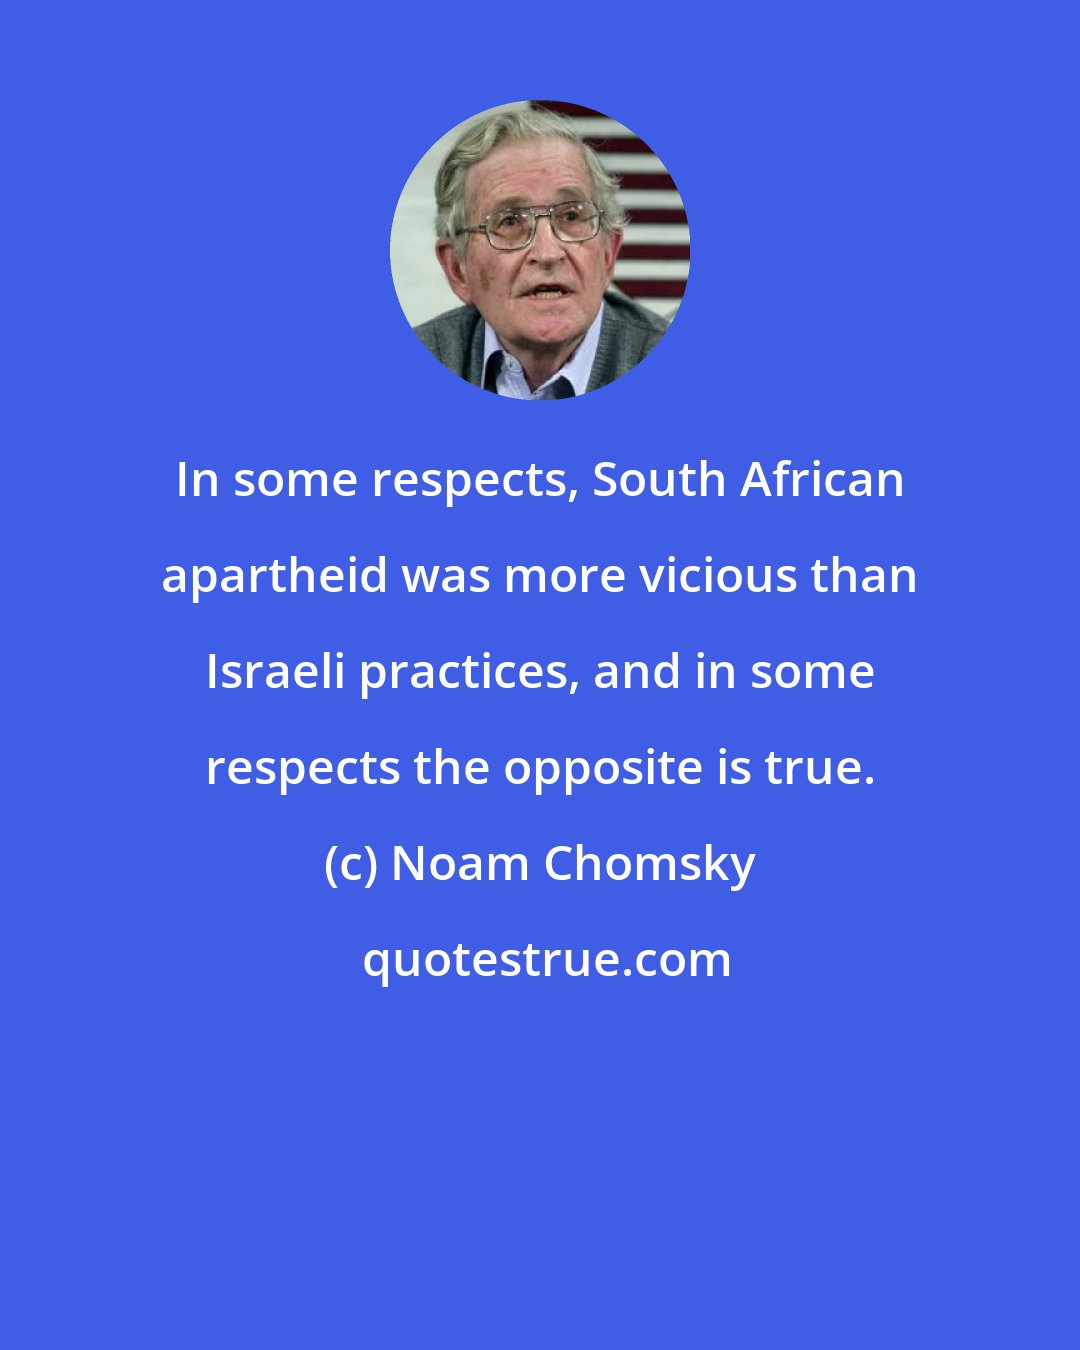 Noam Chomsky: In some respects, South African apartheid was more vicious than Israeli practices, and in some respects the opposite is true.